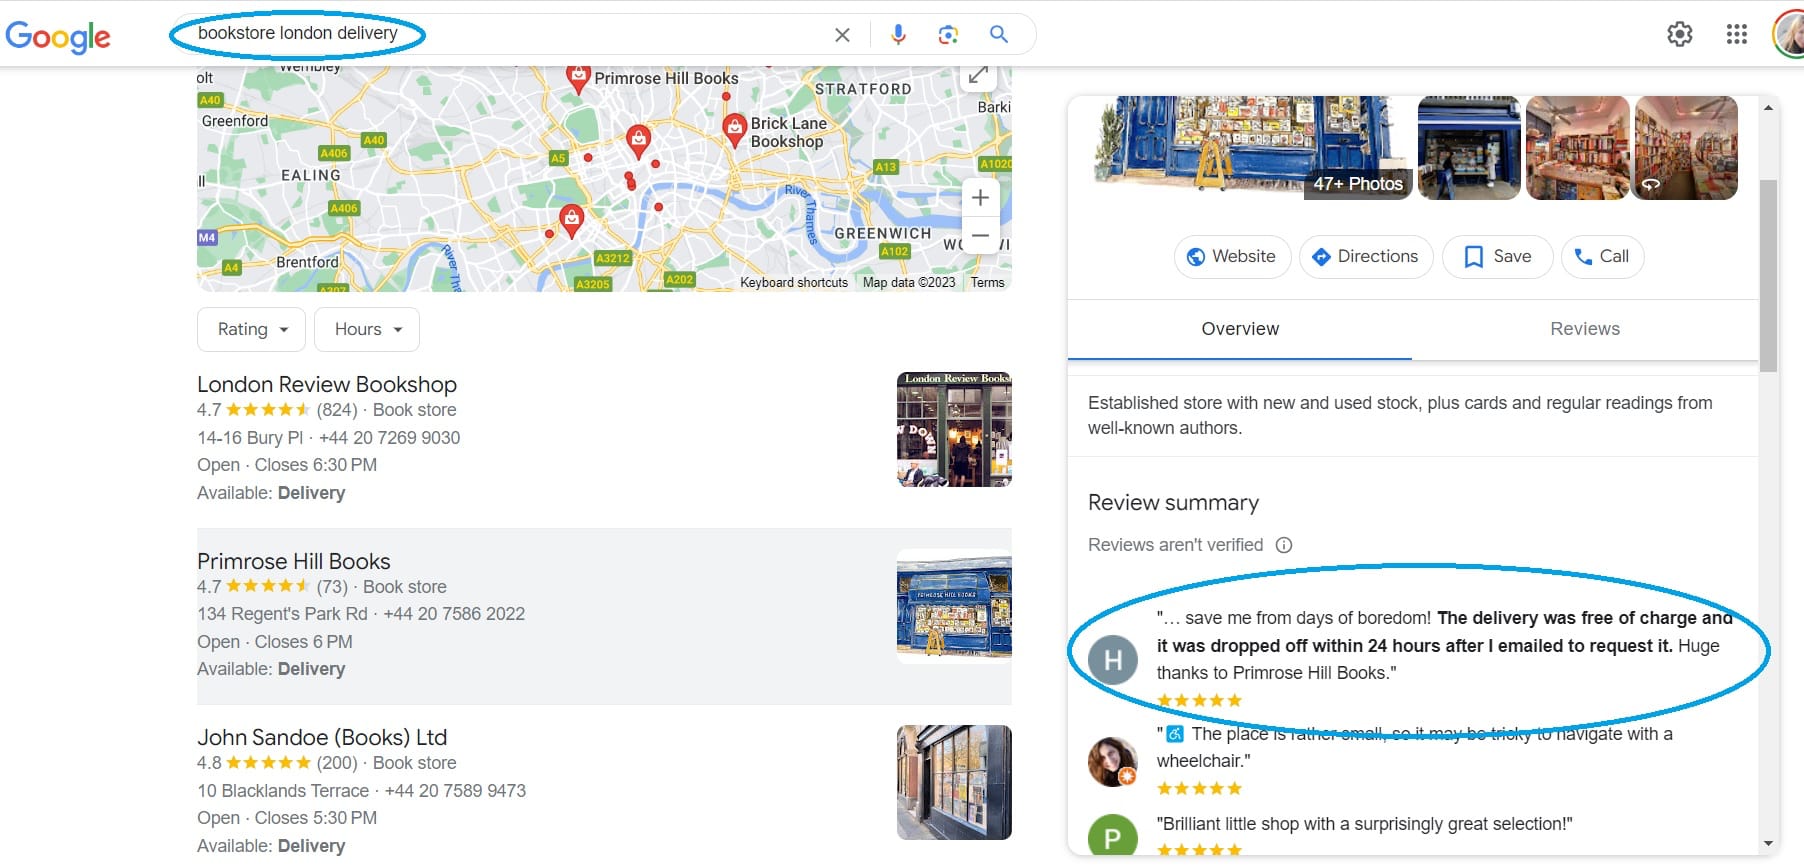 Google pulls up reviews on delivery